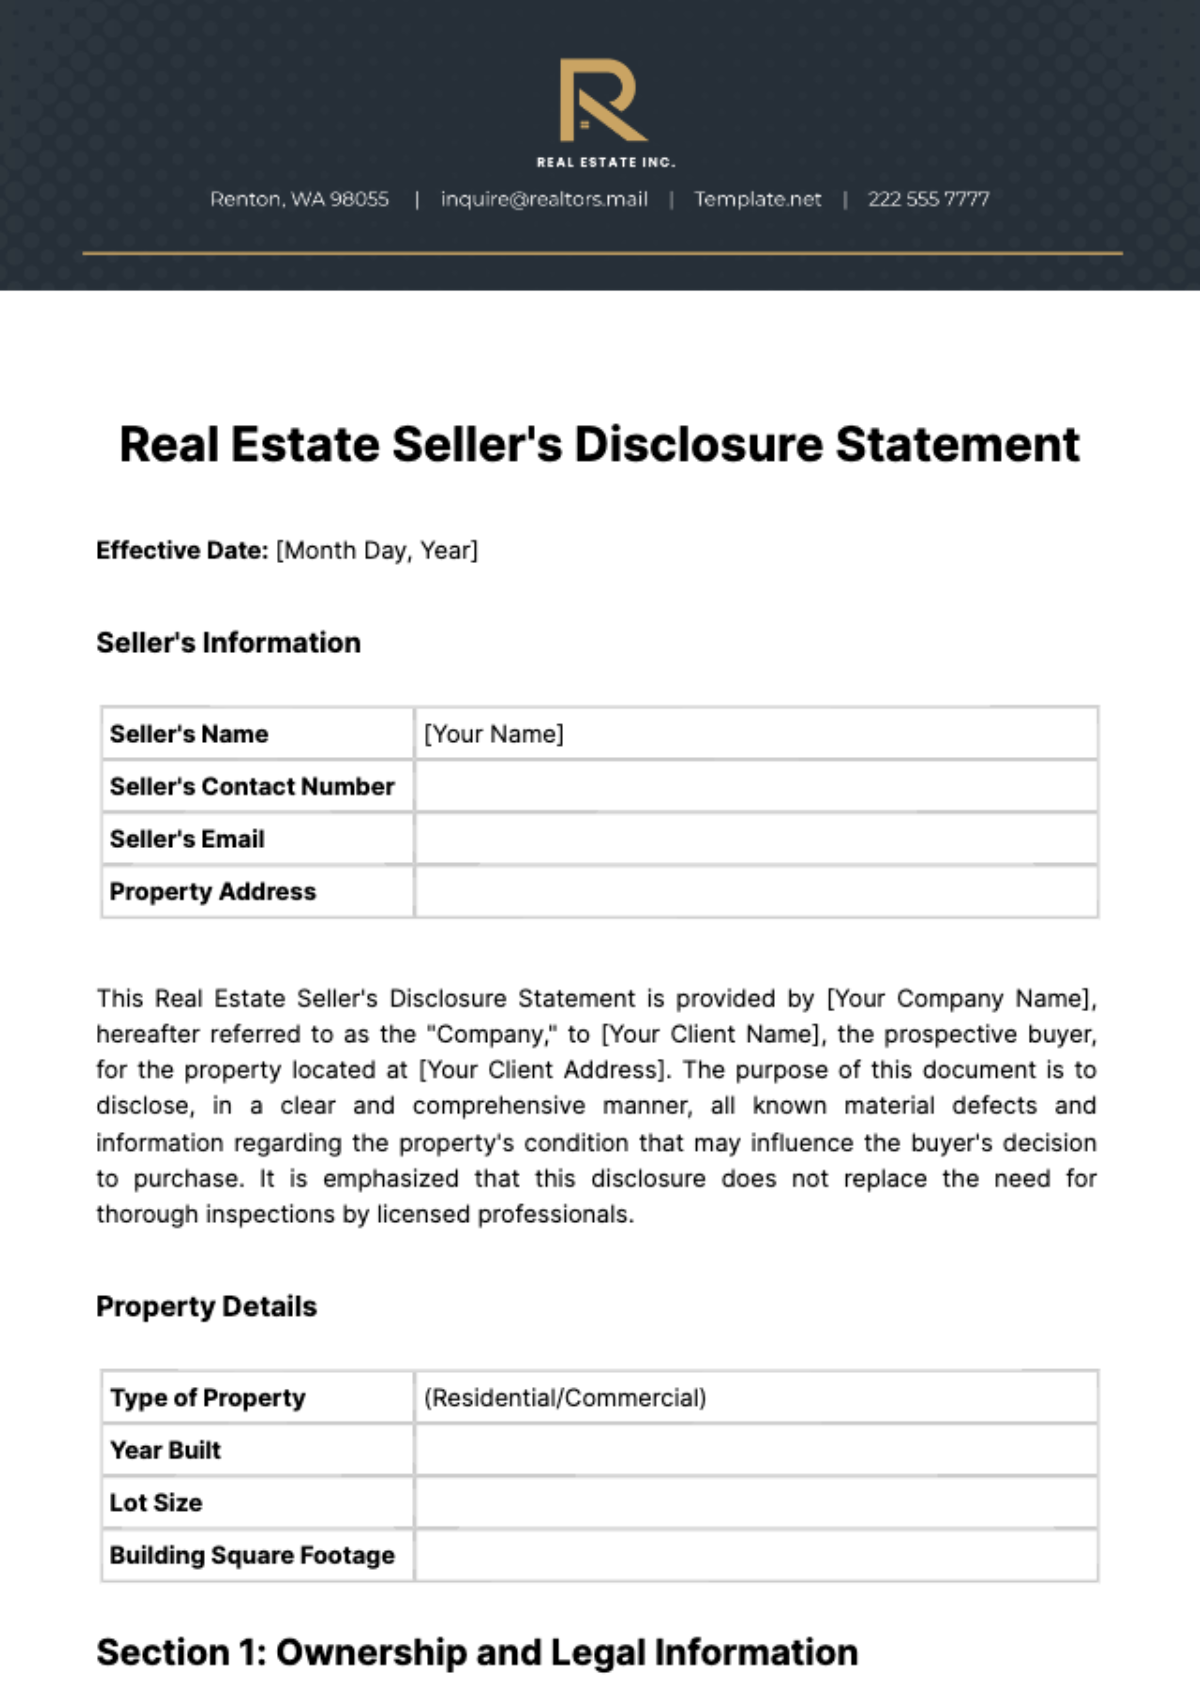 Real Estate Seller's Disclosure Statement Template